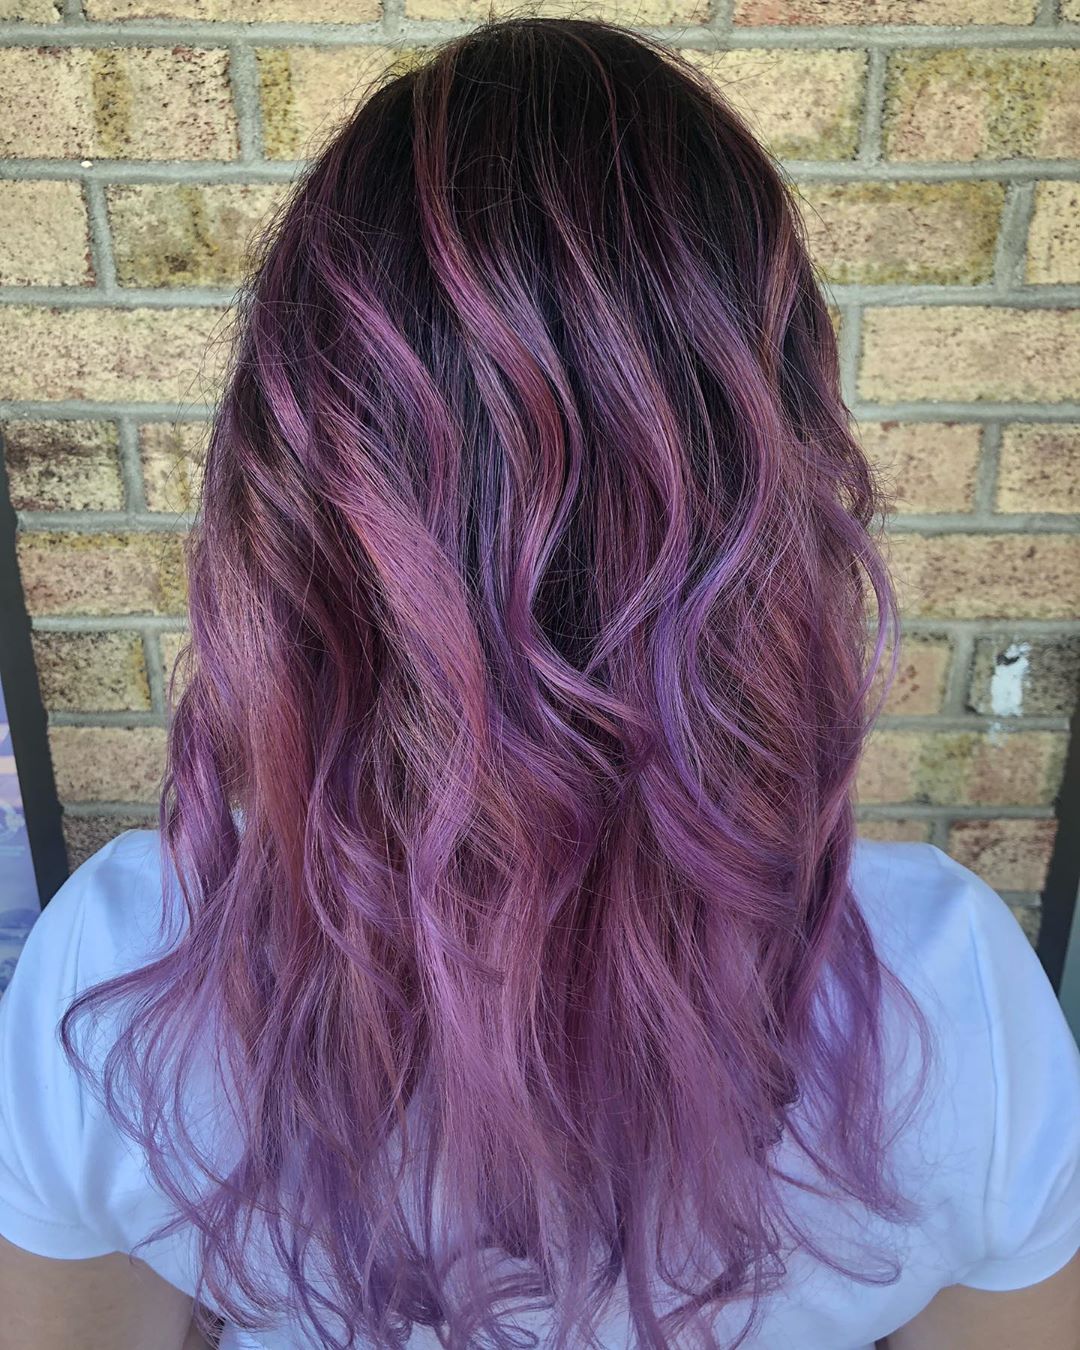 29 Pink and Purple Hair Color Ideas Trending Right Now